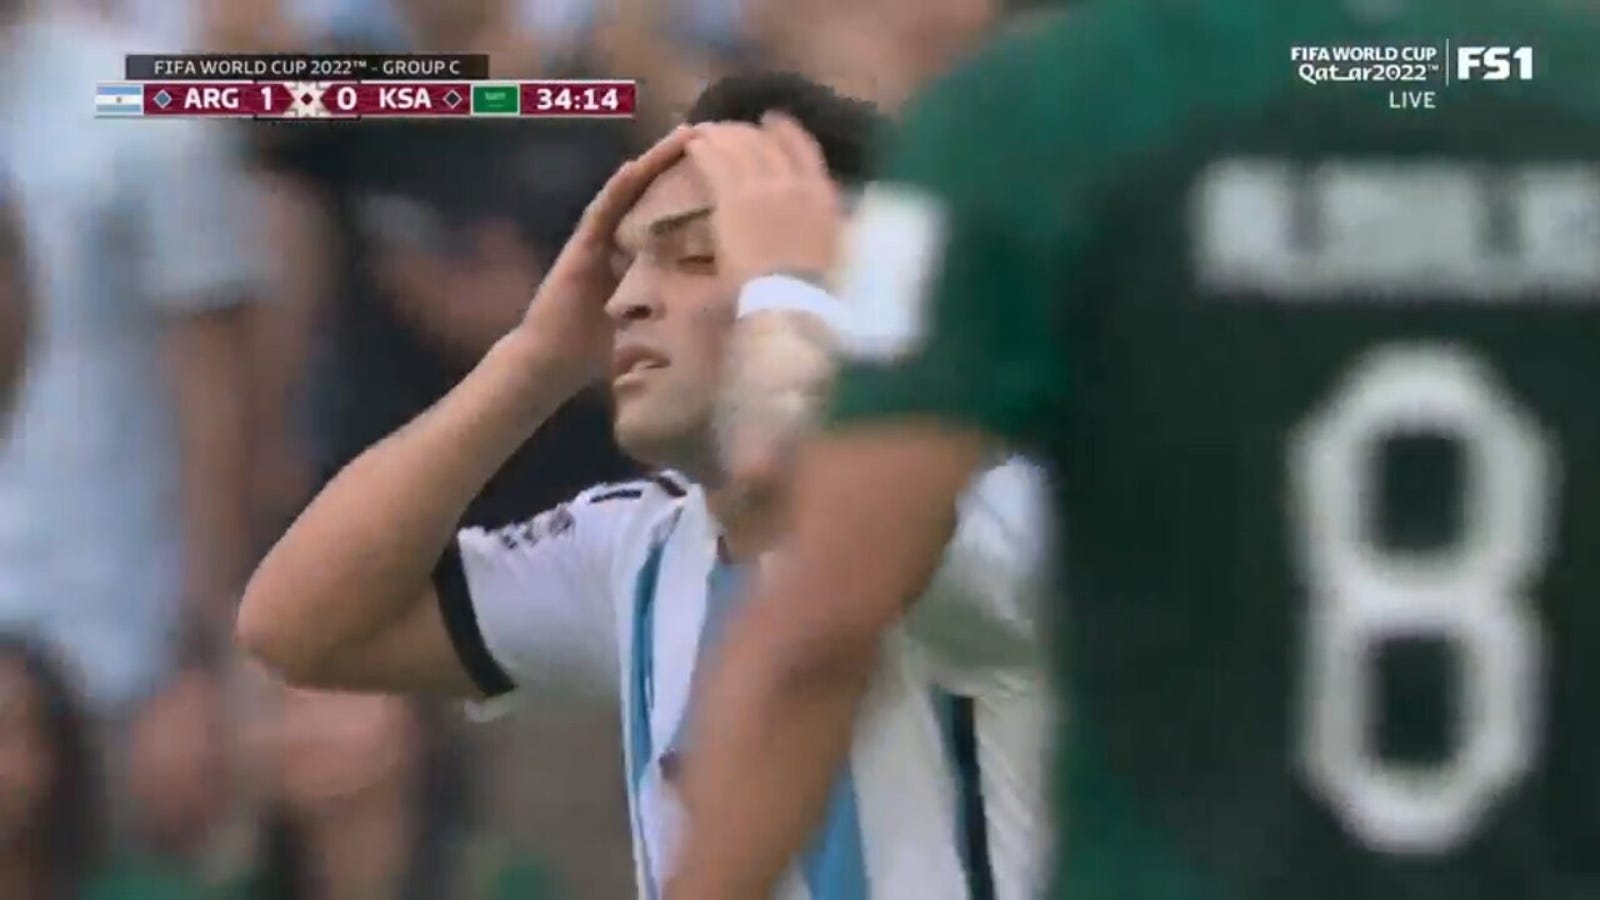 Argentina caught offside seven total times in first half vs. Saudi Arabia